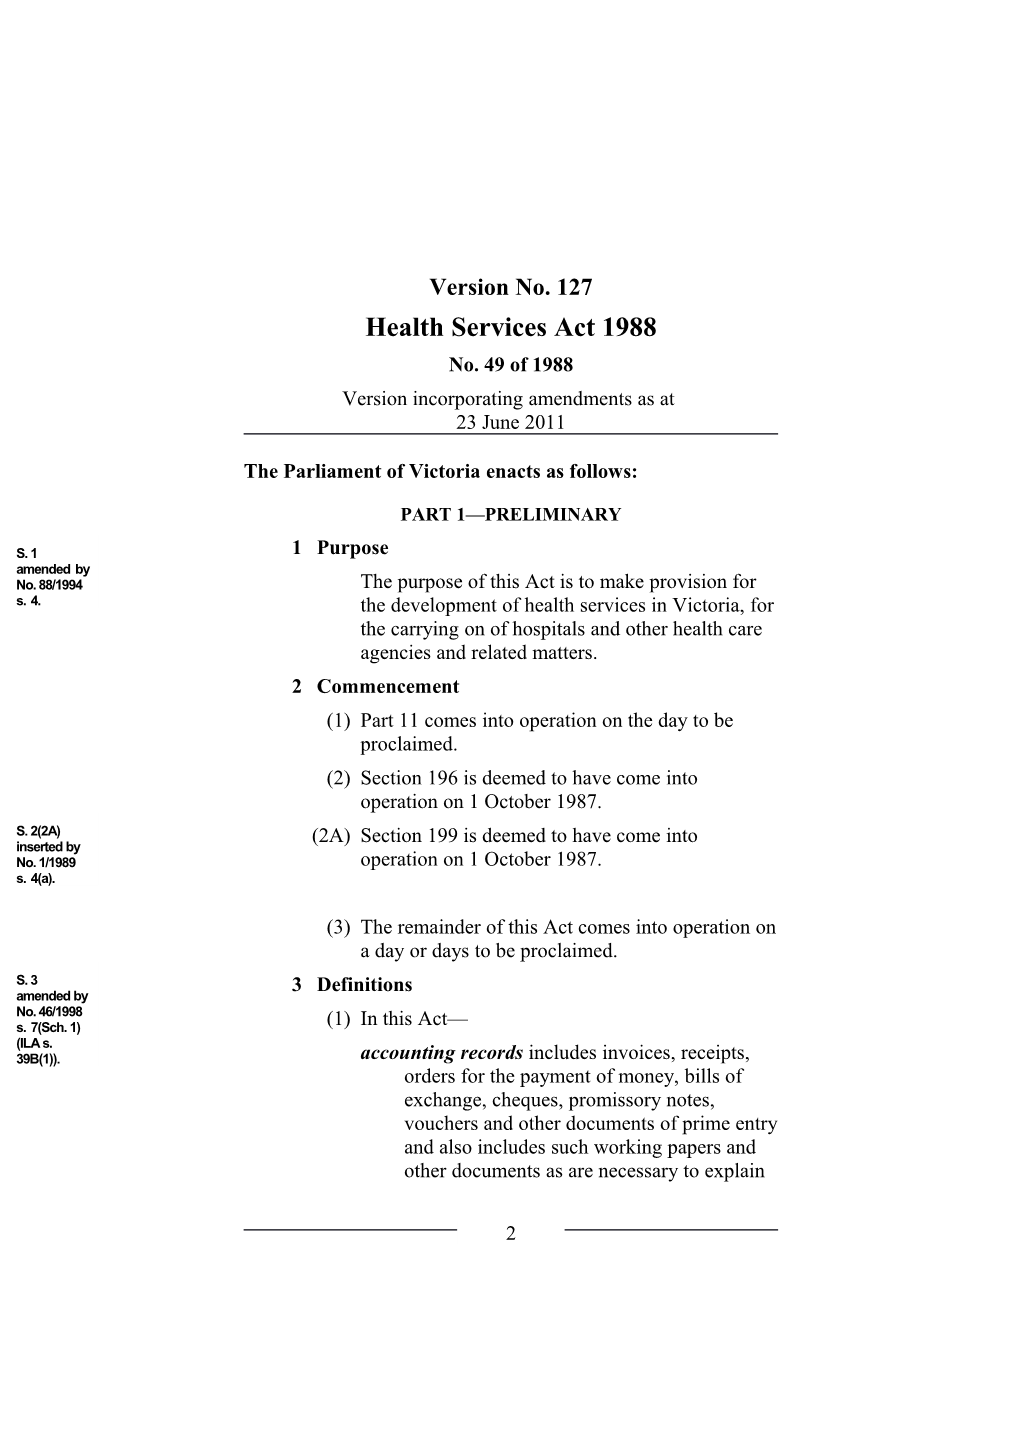 Health Services Act 1988